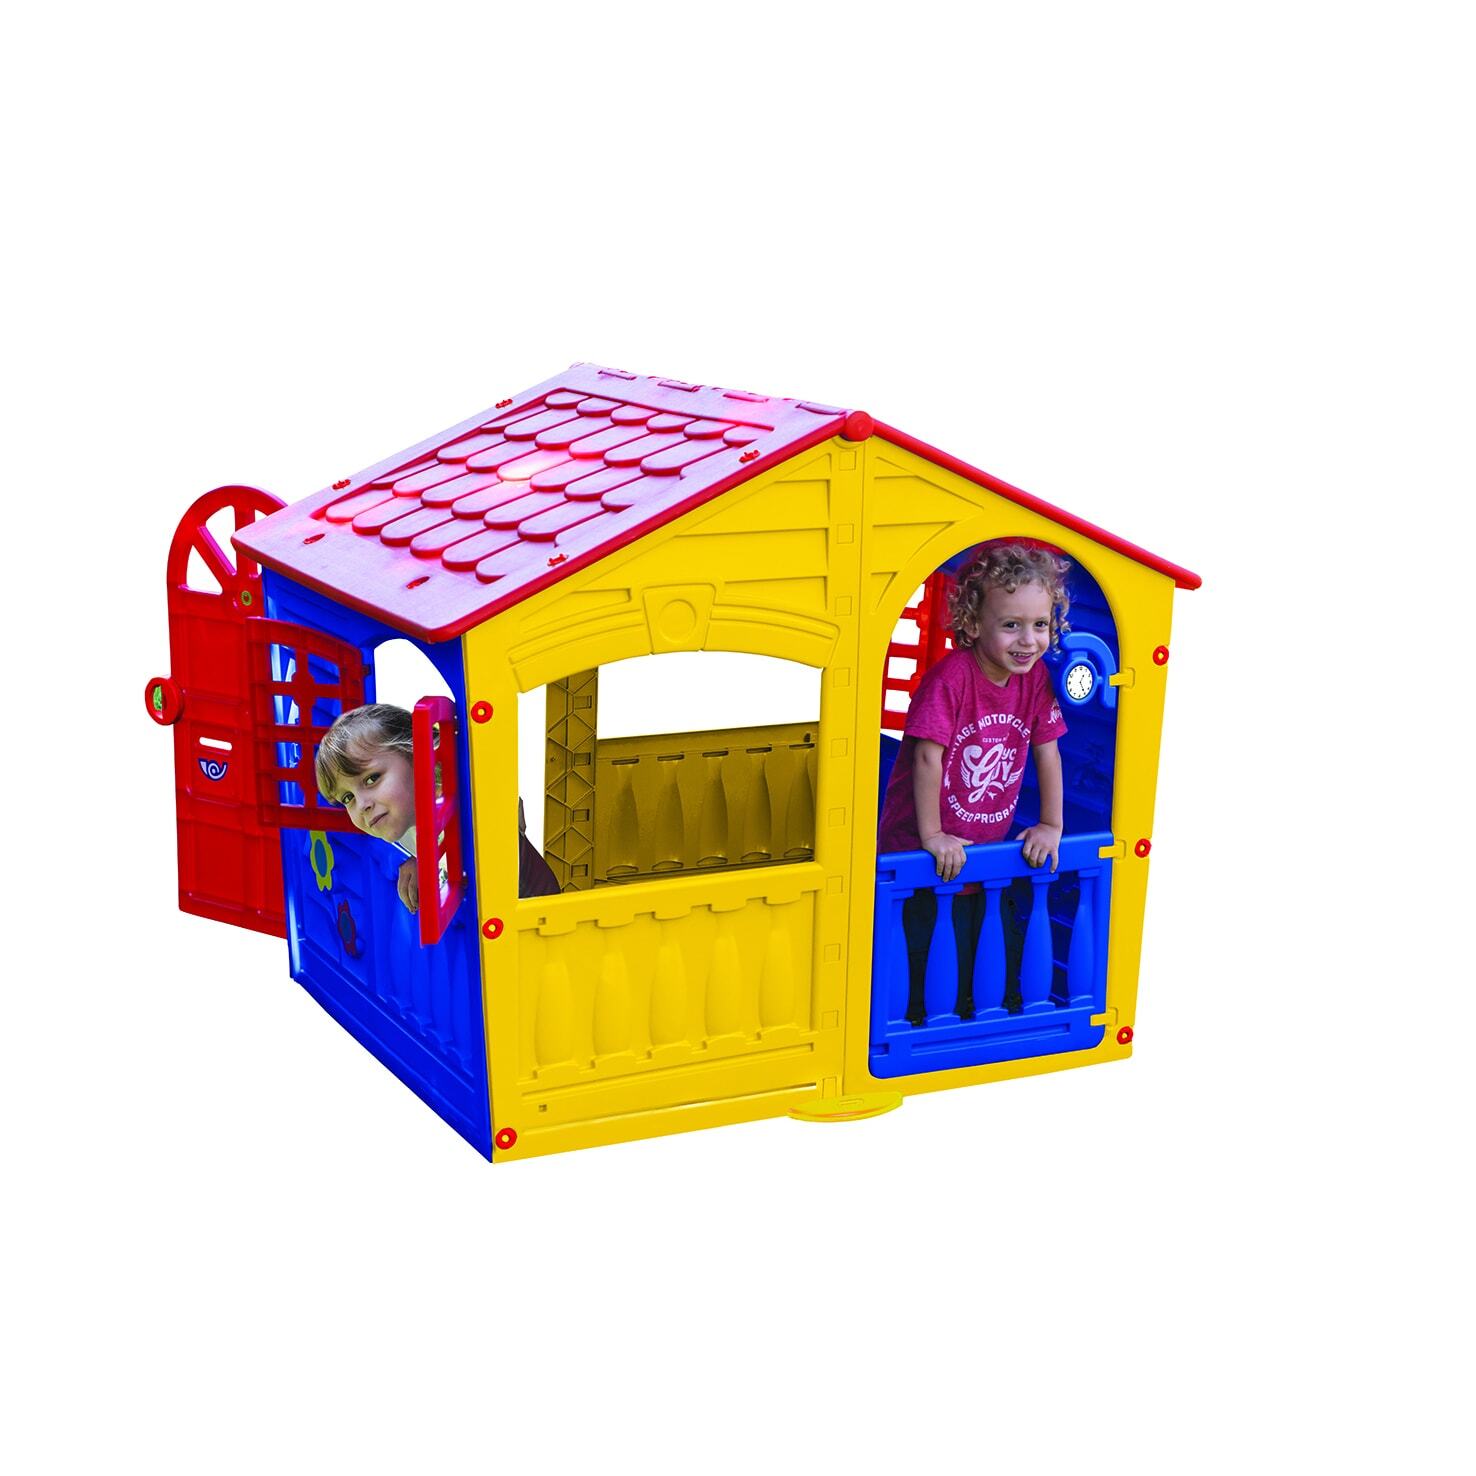 Colorful ABS Plastic Club Houses for Kids